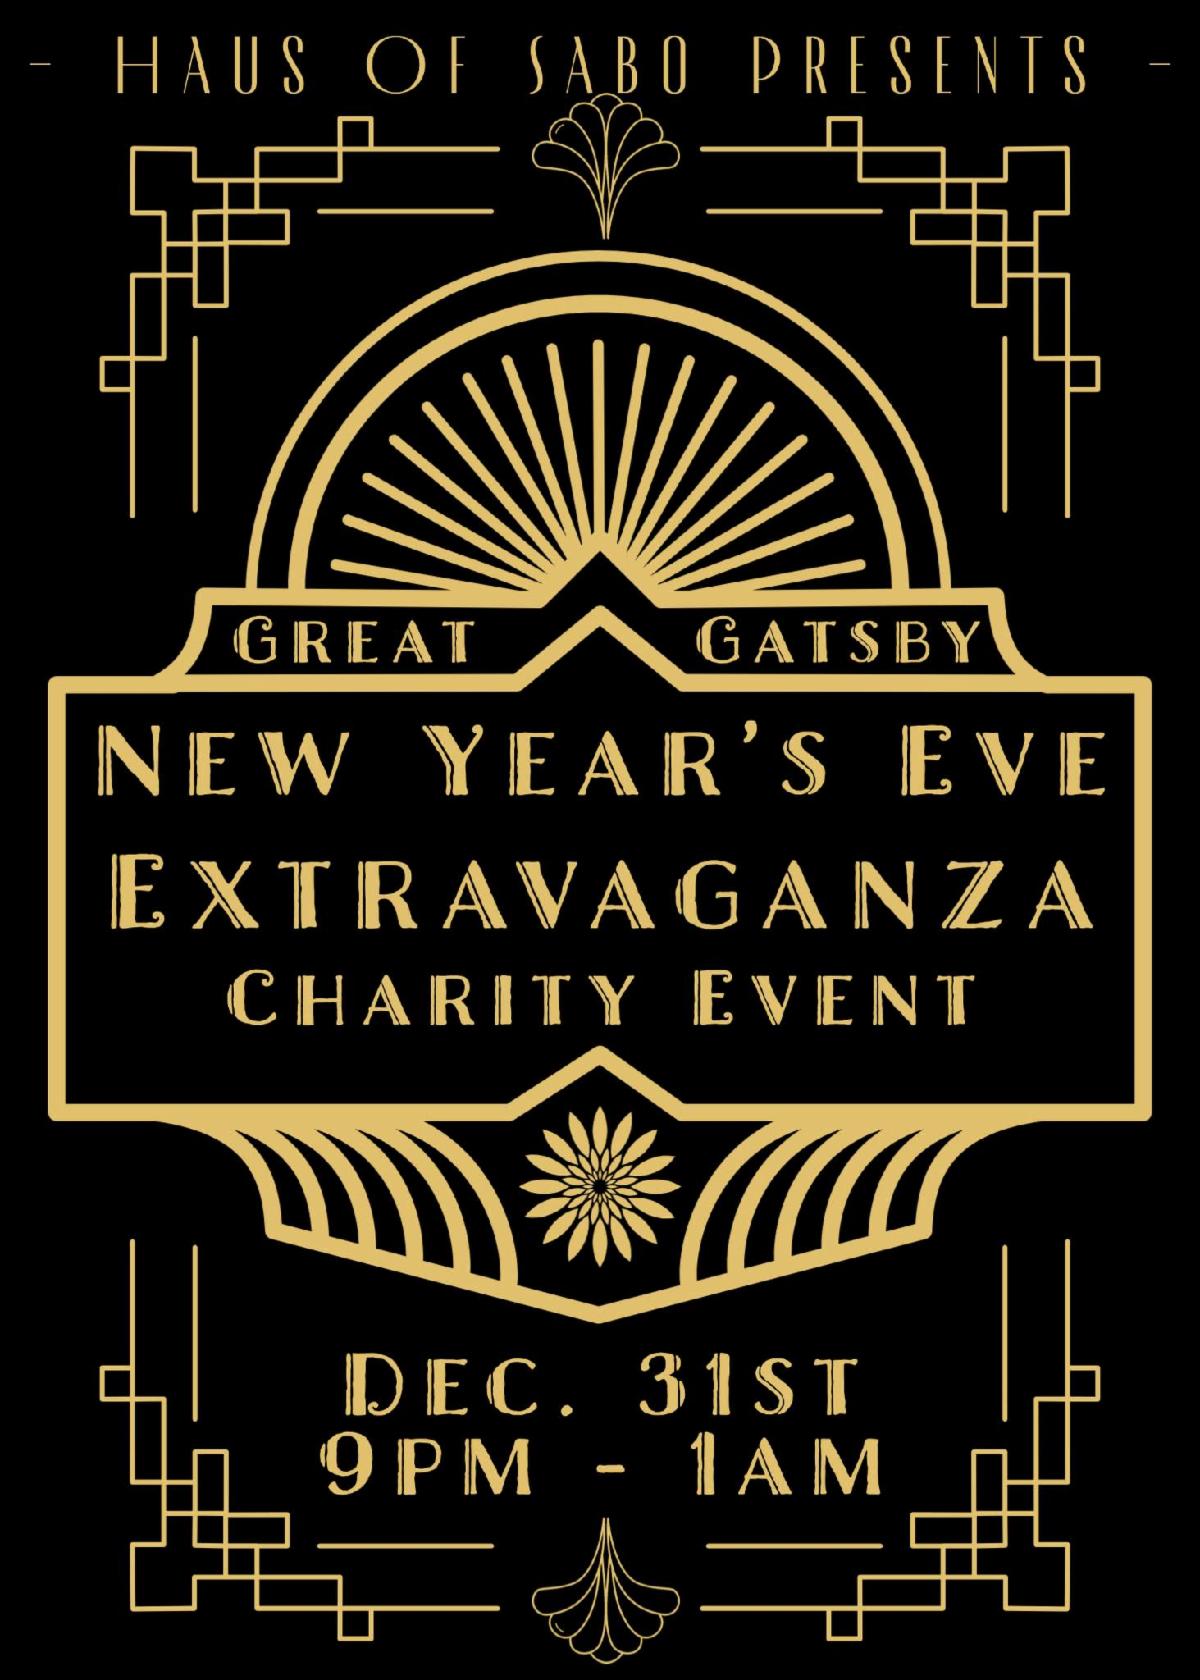 Haus of Sabo Great Gatsby New Year’s Eve